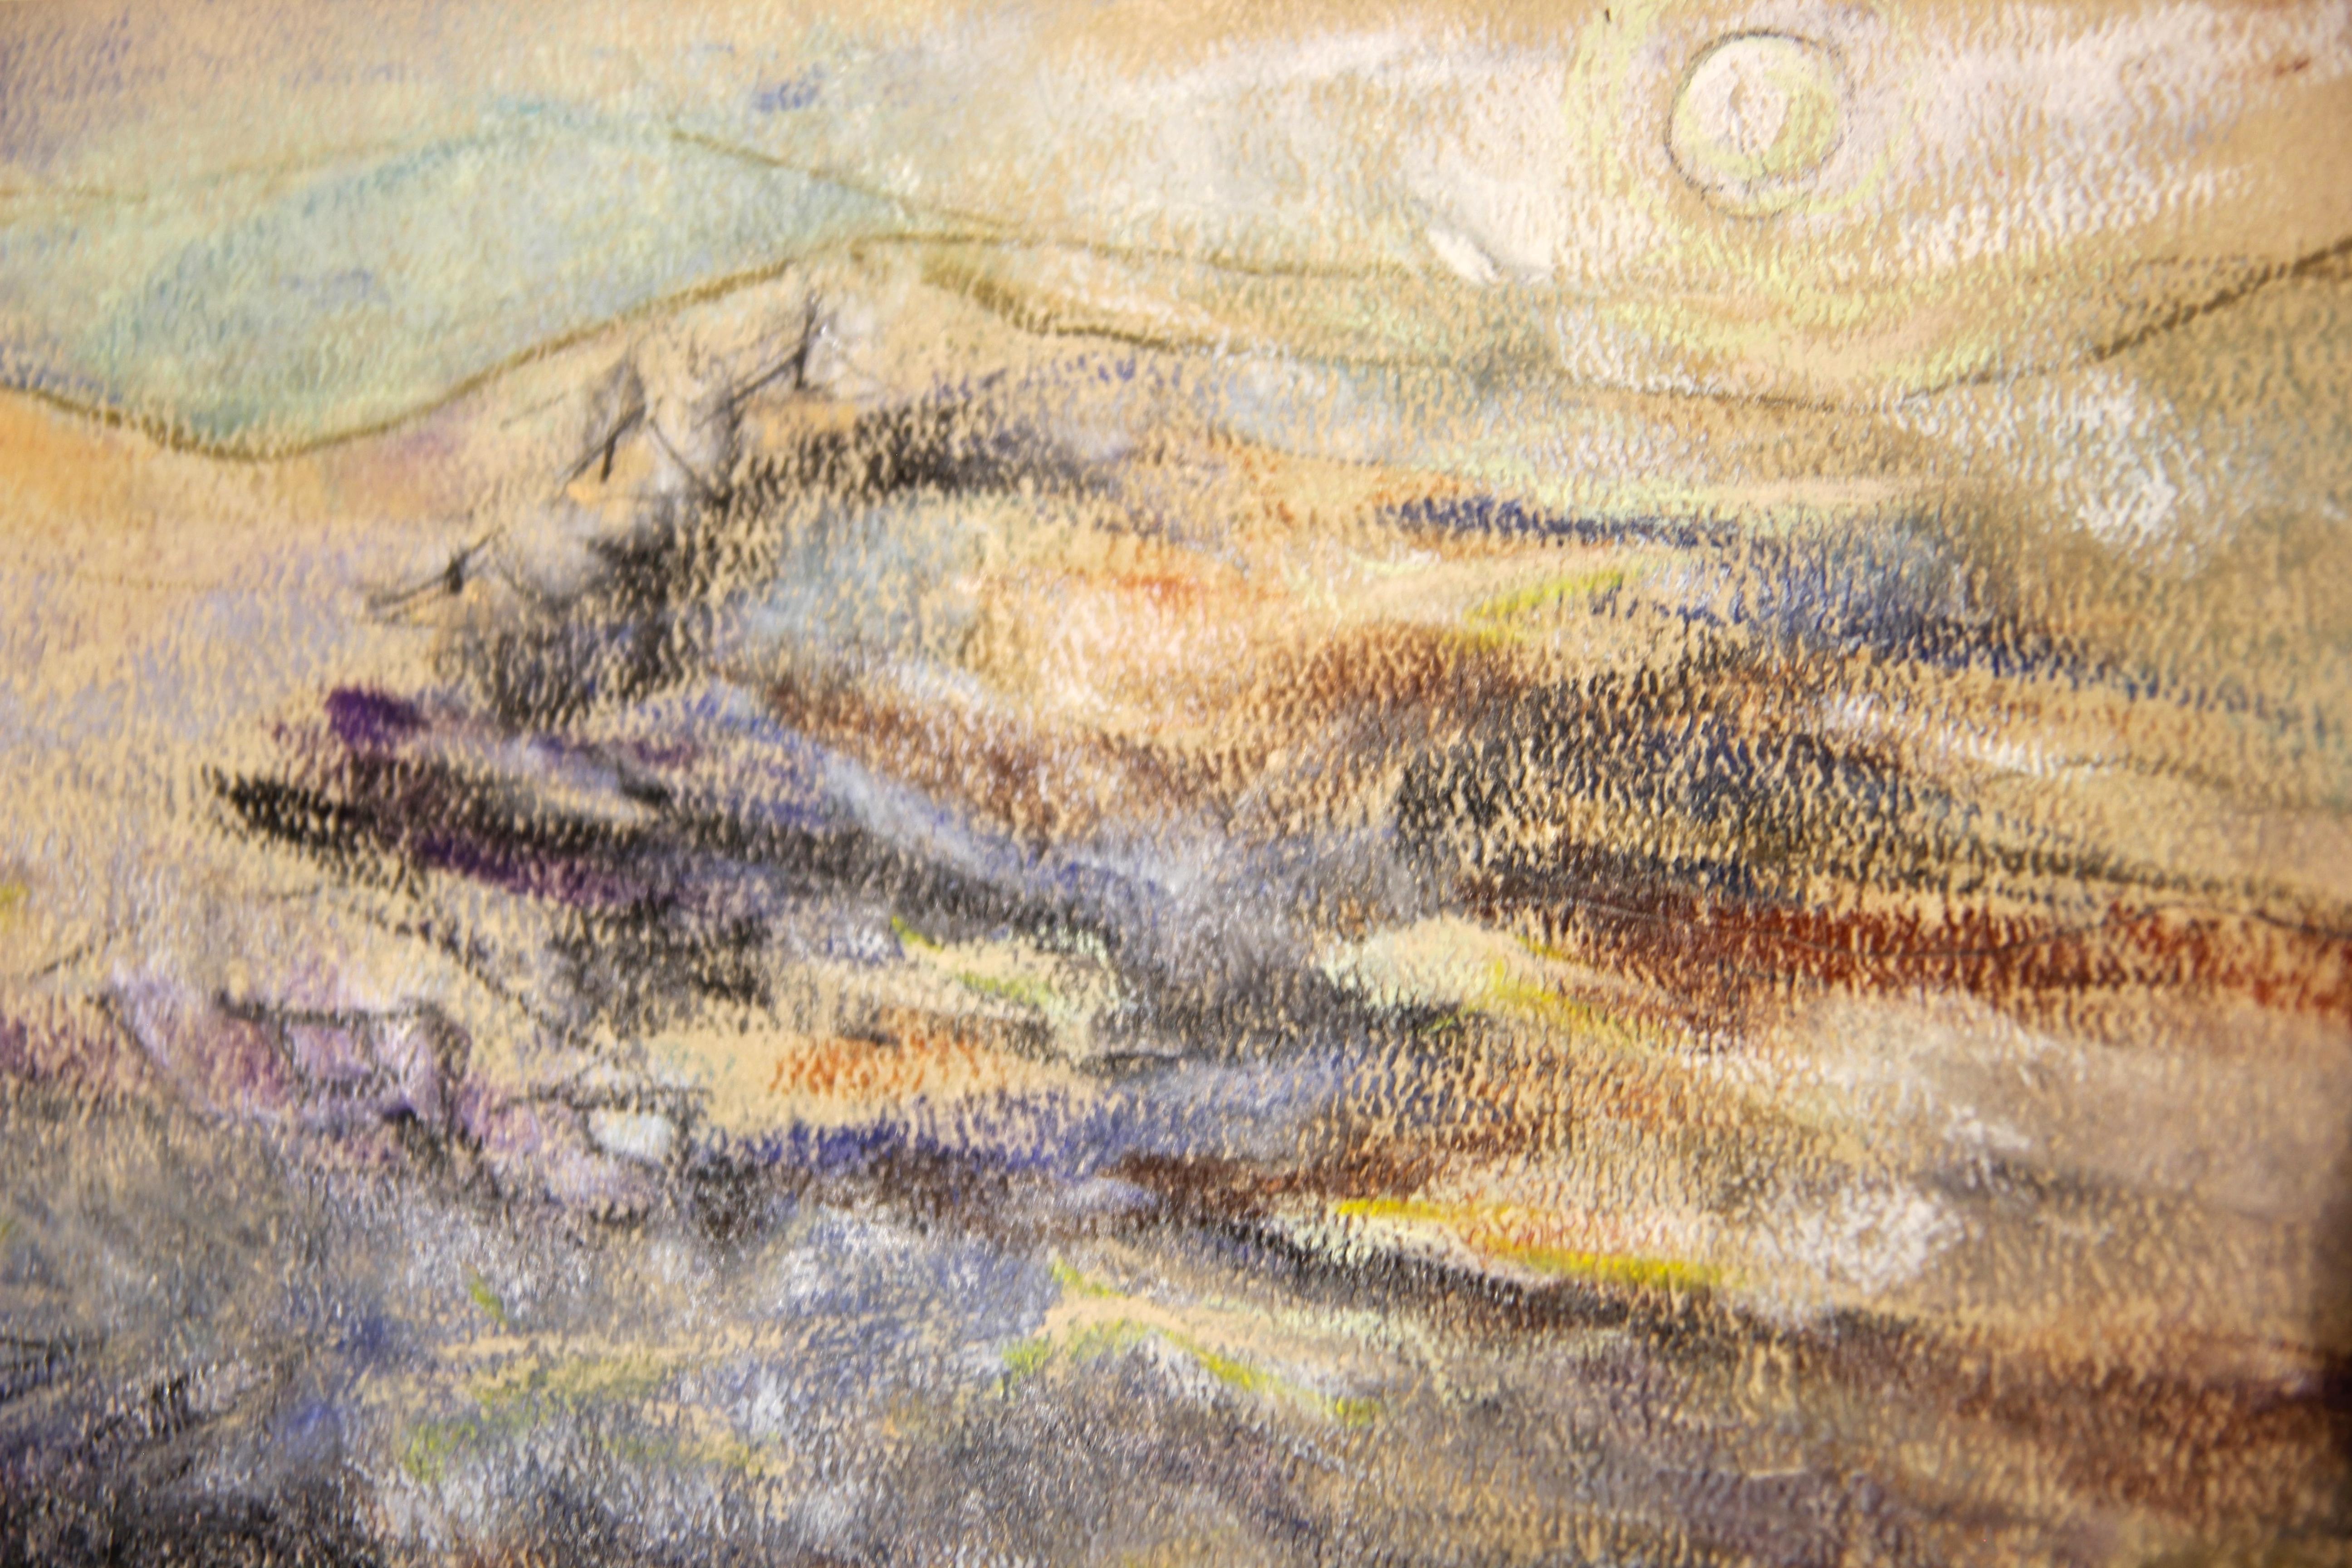 Modern abstract blue and orange toned landscape drawing by American artist Jane Tate. The work features a majestic mountain landscape with houses dotting the countryside. Signed in front lower right corner. Currently unframed, but options are